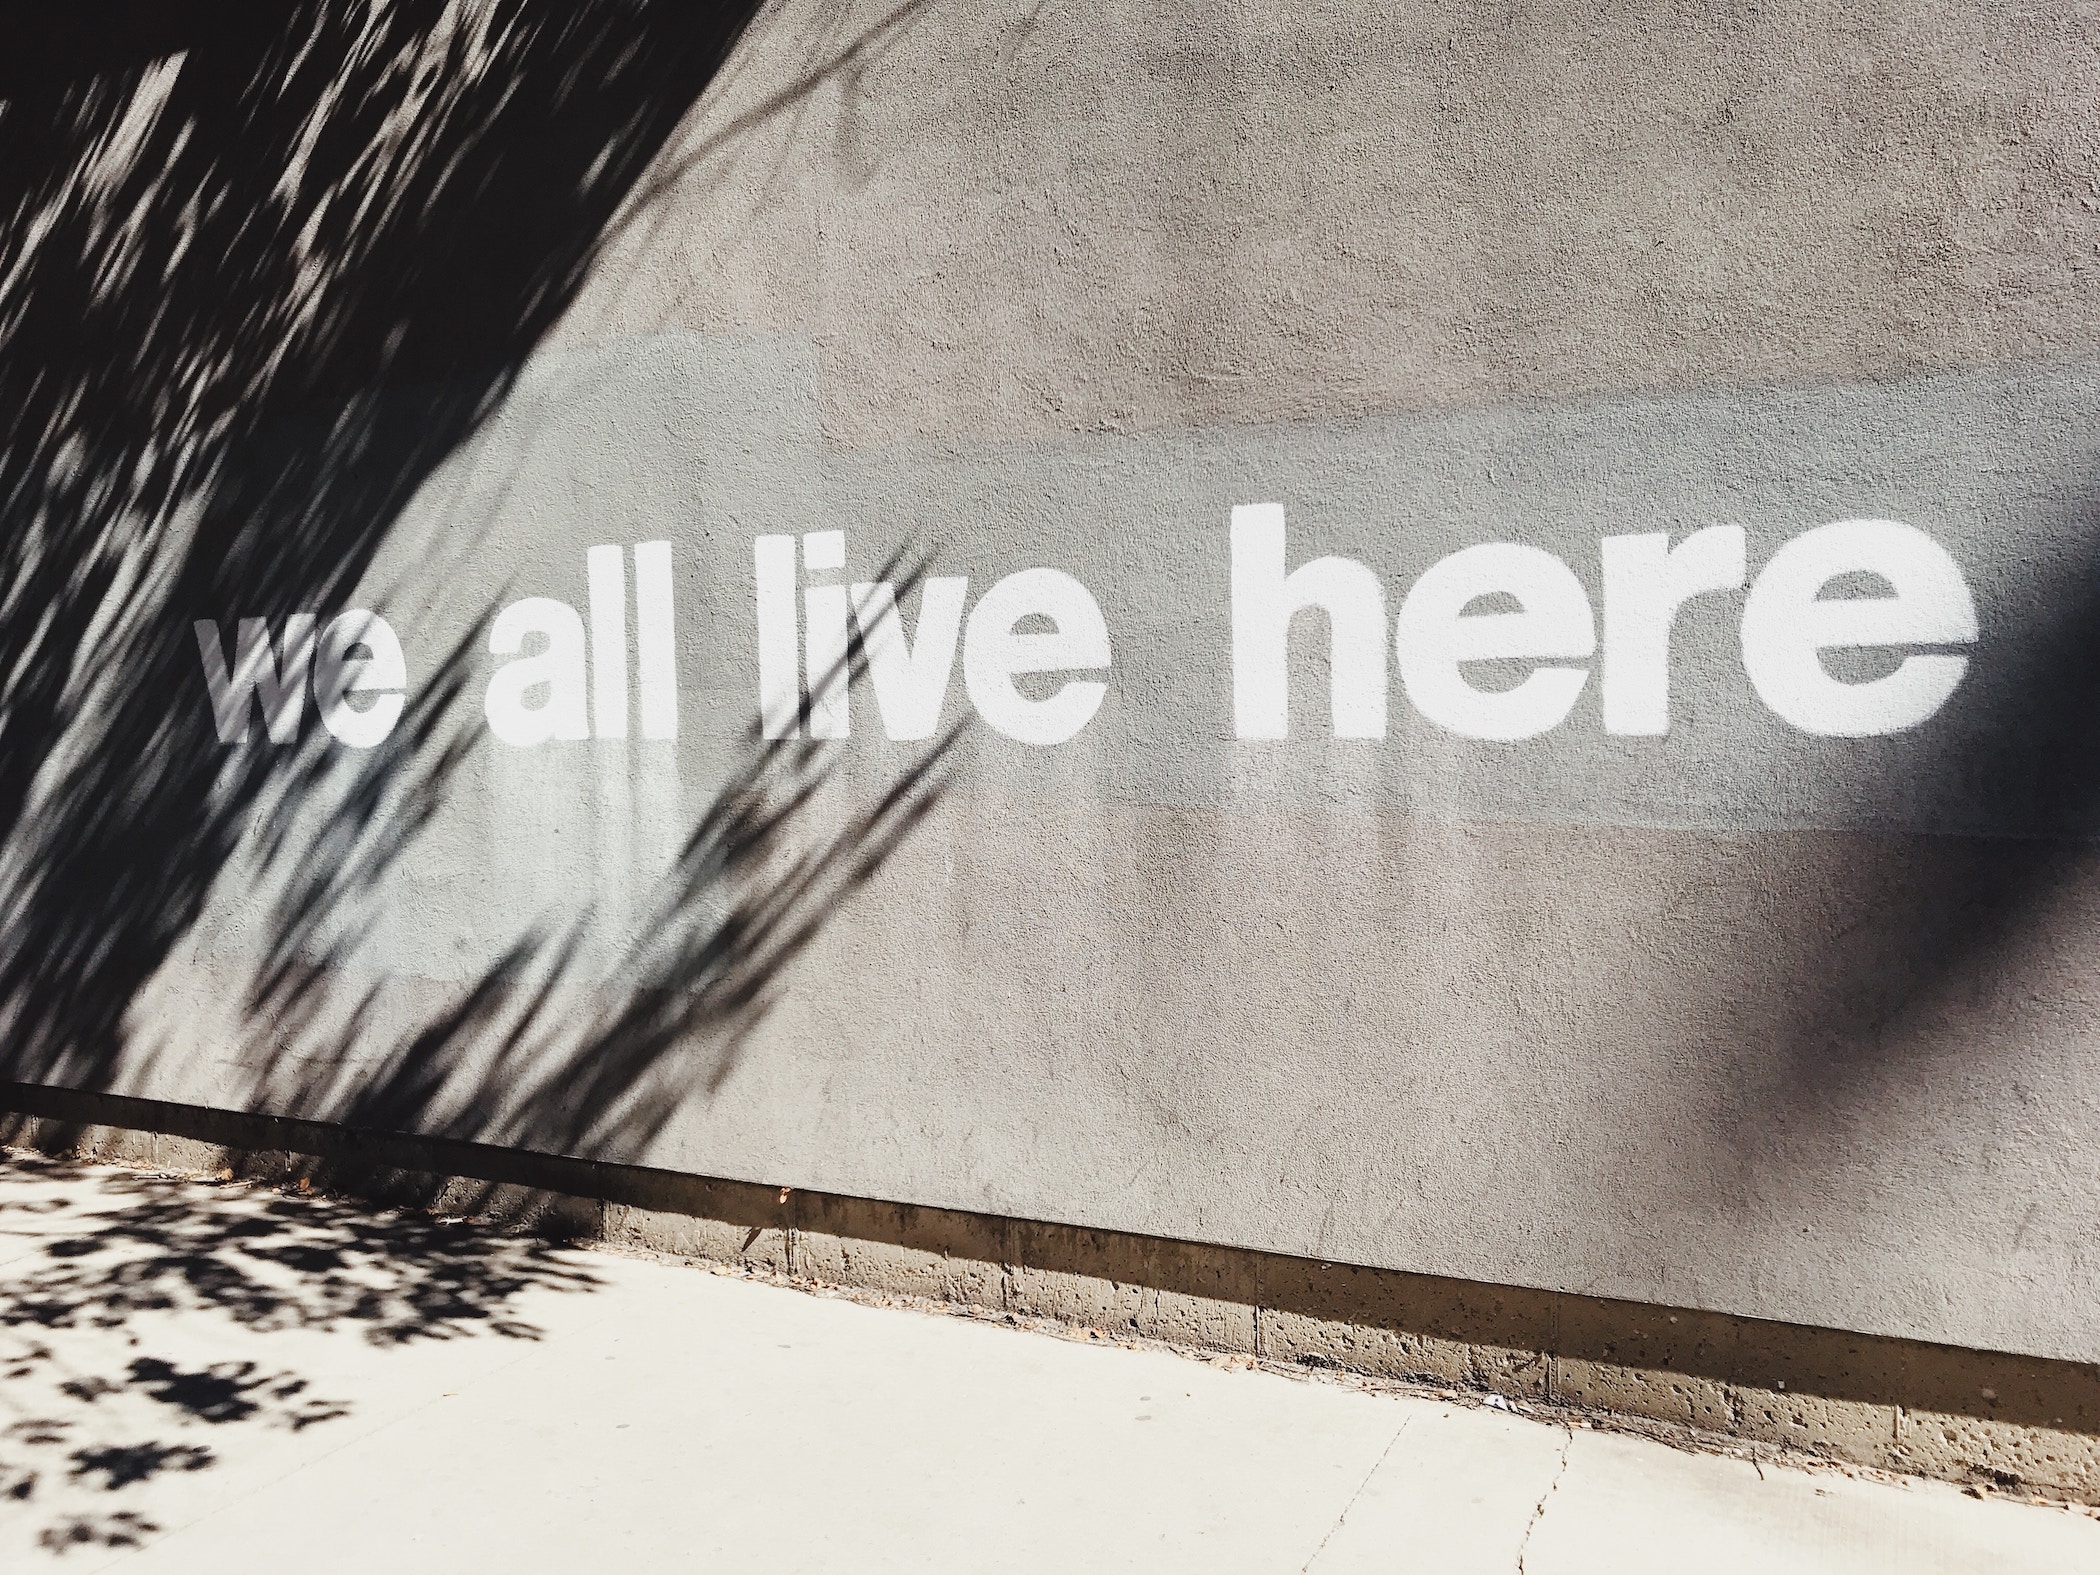 Wall that says 'we all live here'